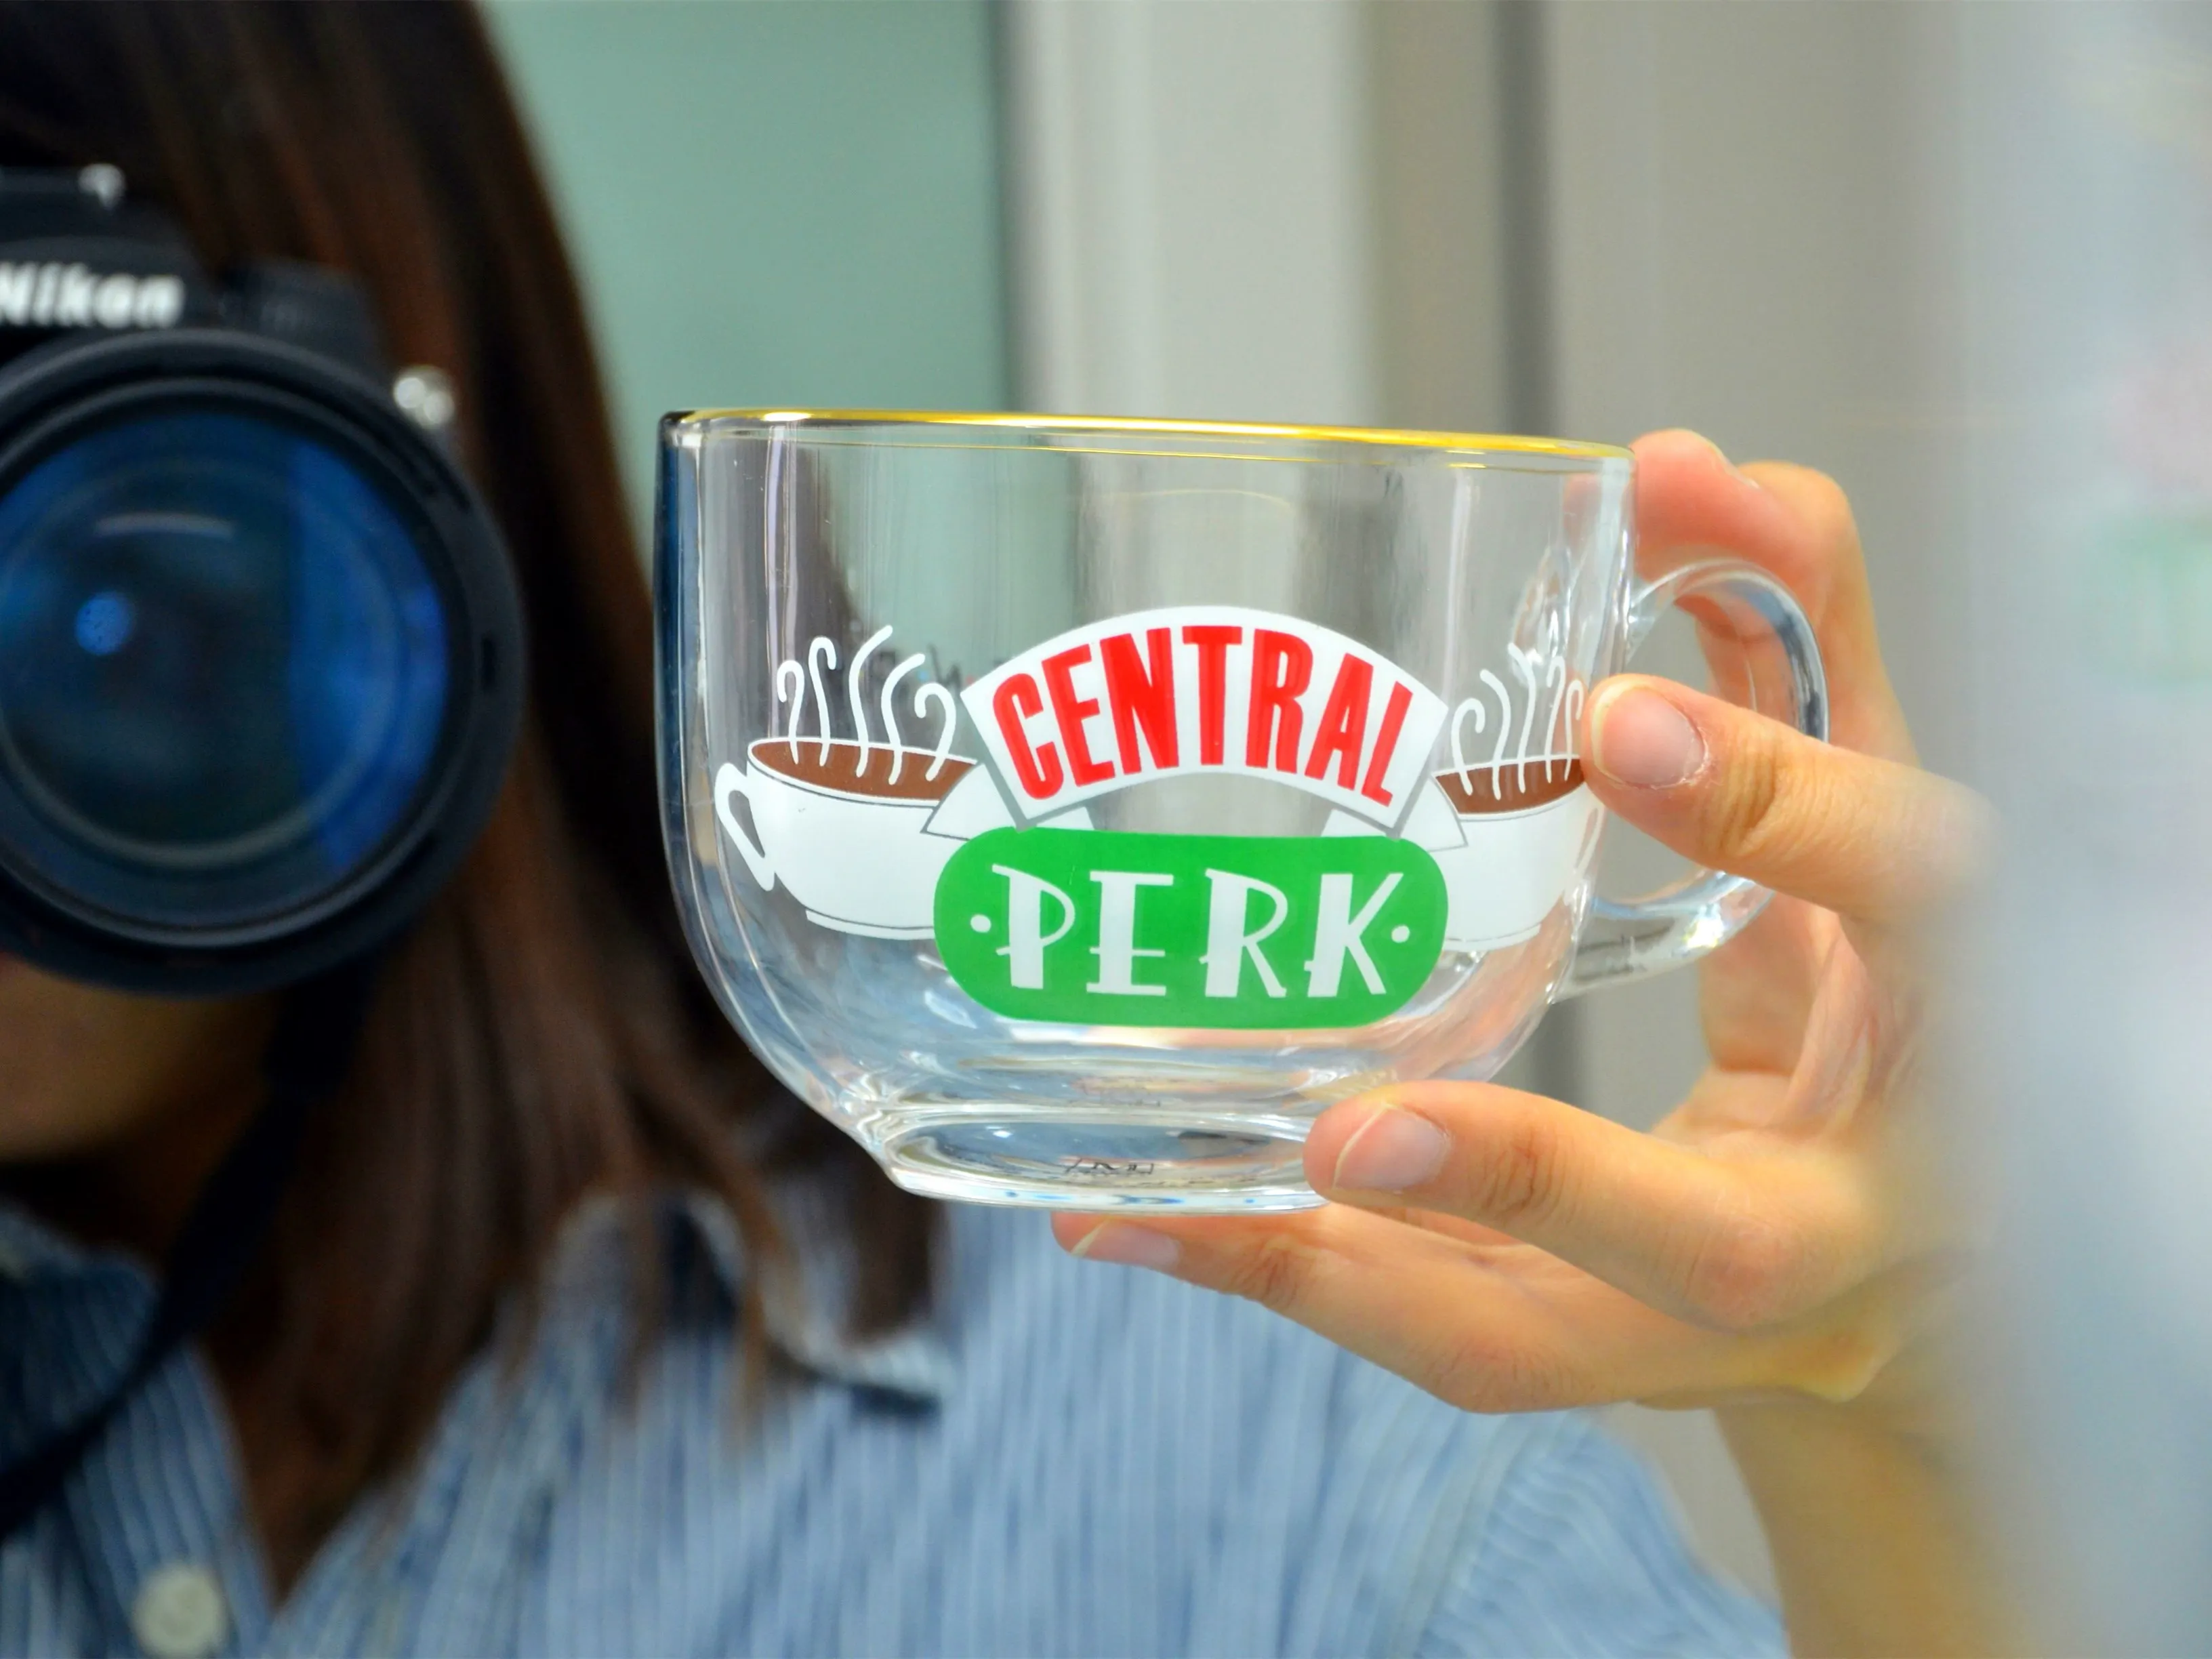 

New Friends Tv Show Central Perk Big Mug Ins Phnom Penh Glass Cup Coffee Mug Breakfast Cup Cappuccino Mug Best Gifts for Friends